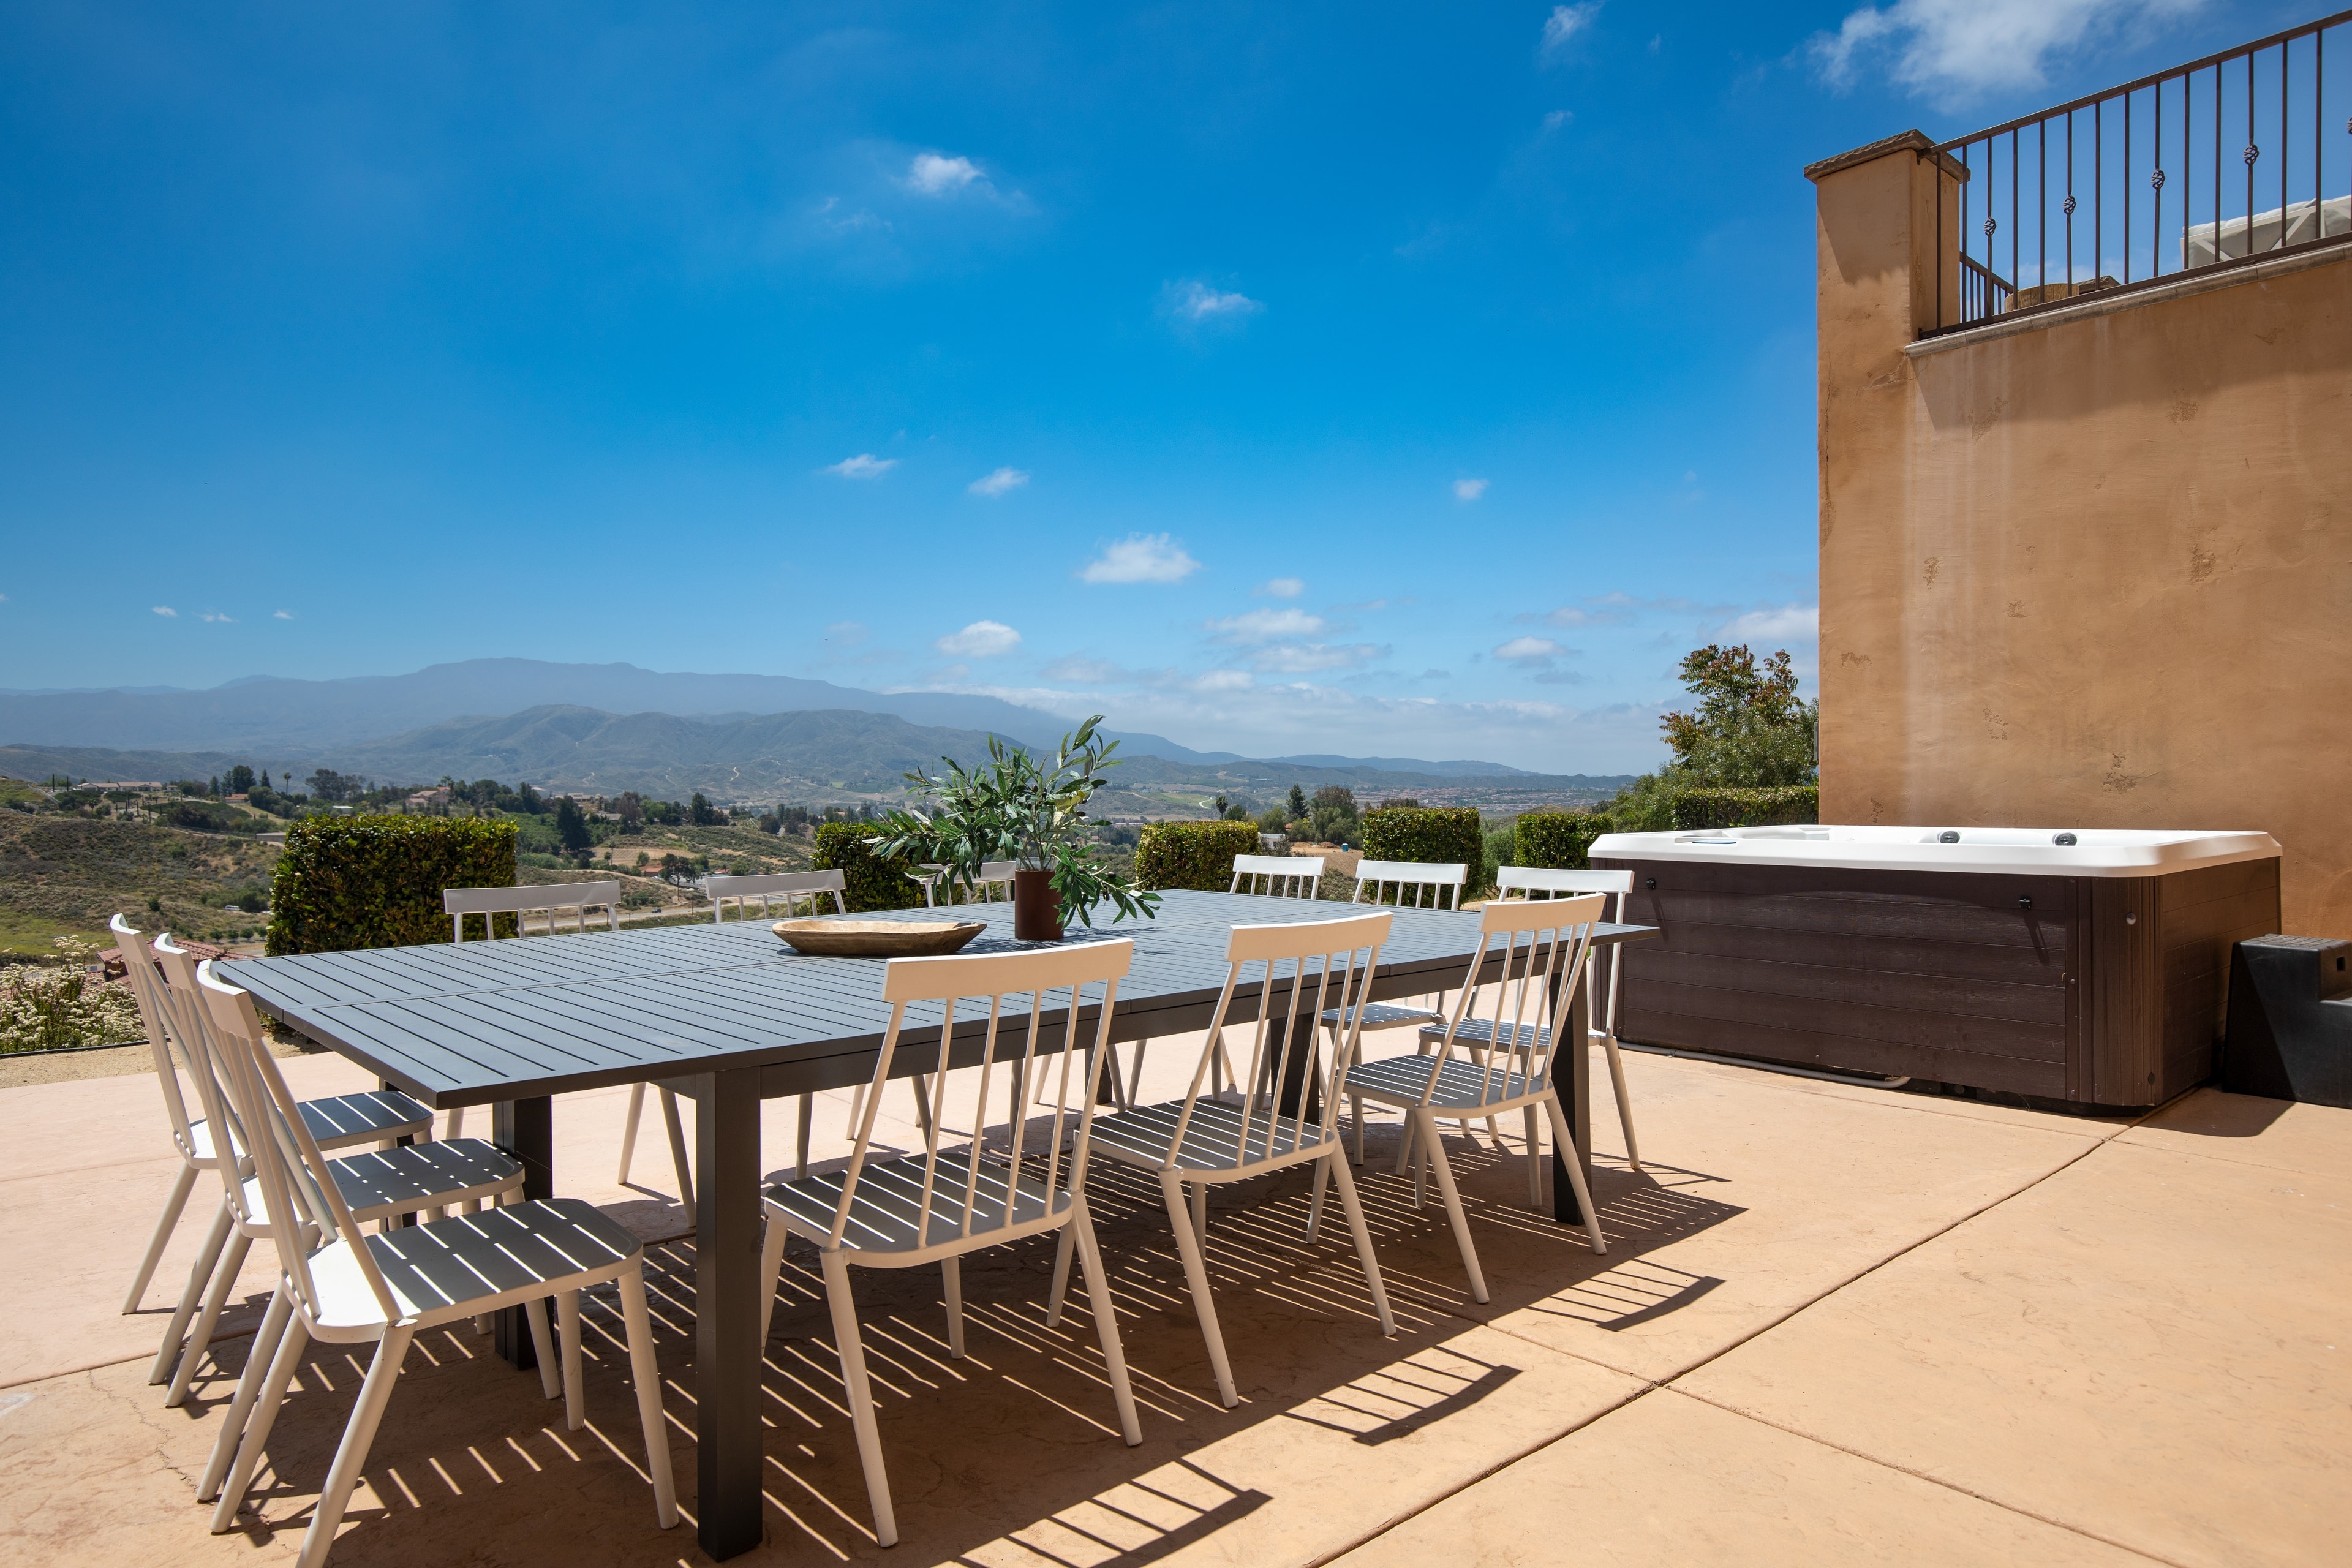 Stunning outdoor spaces with breathtaking views.